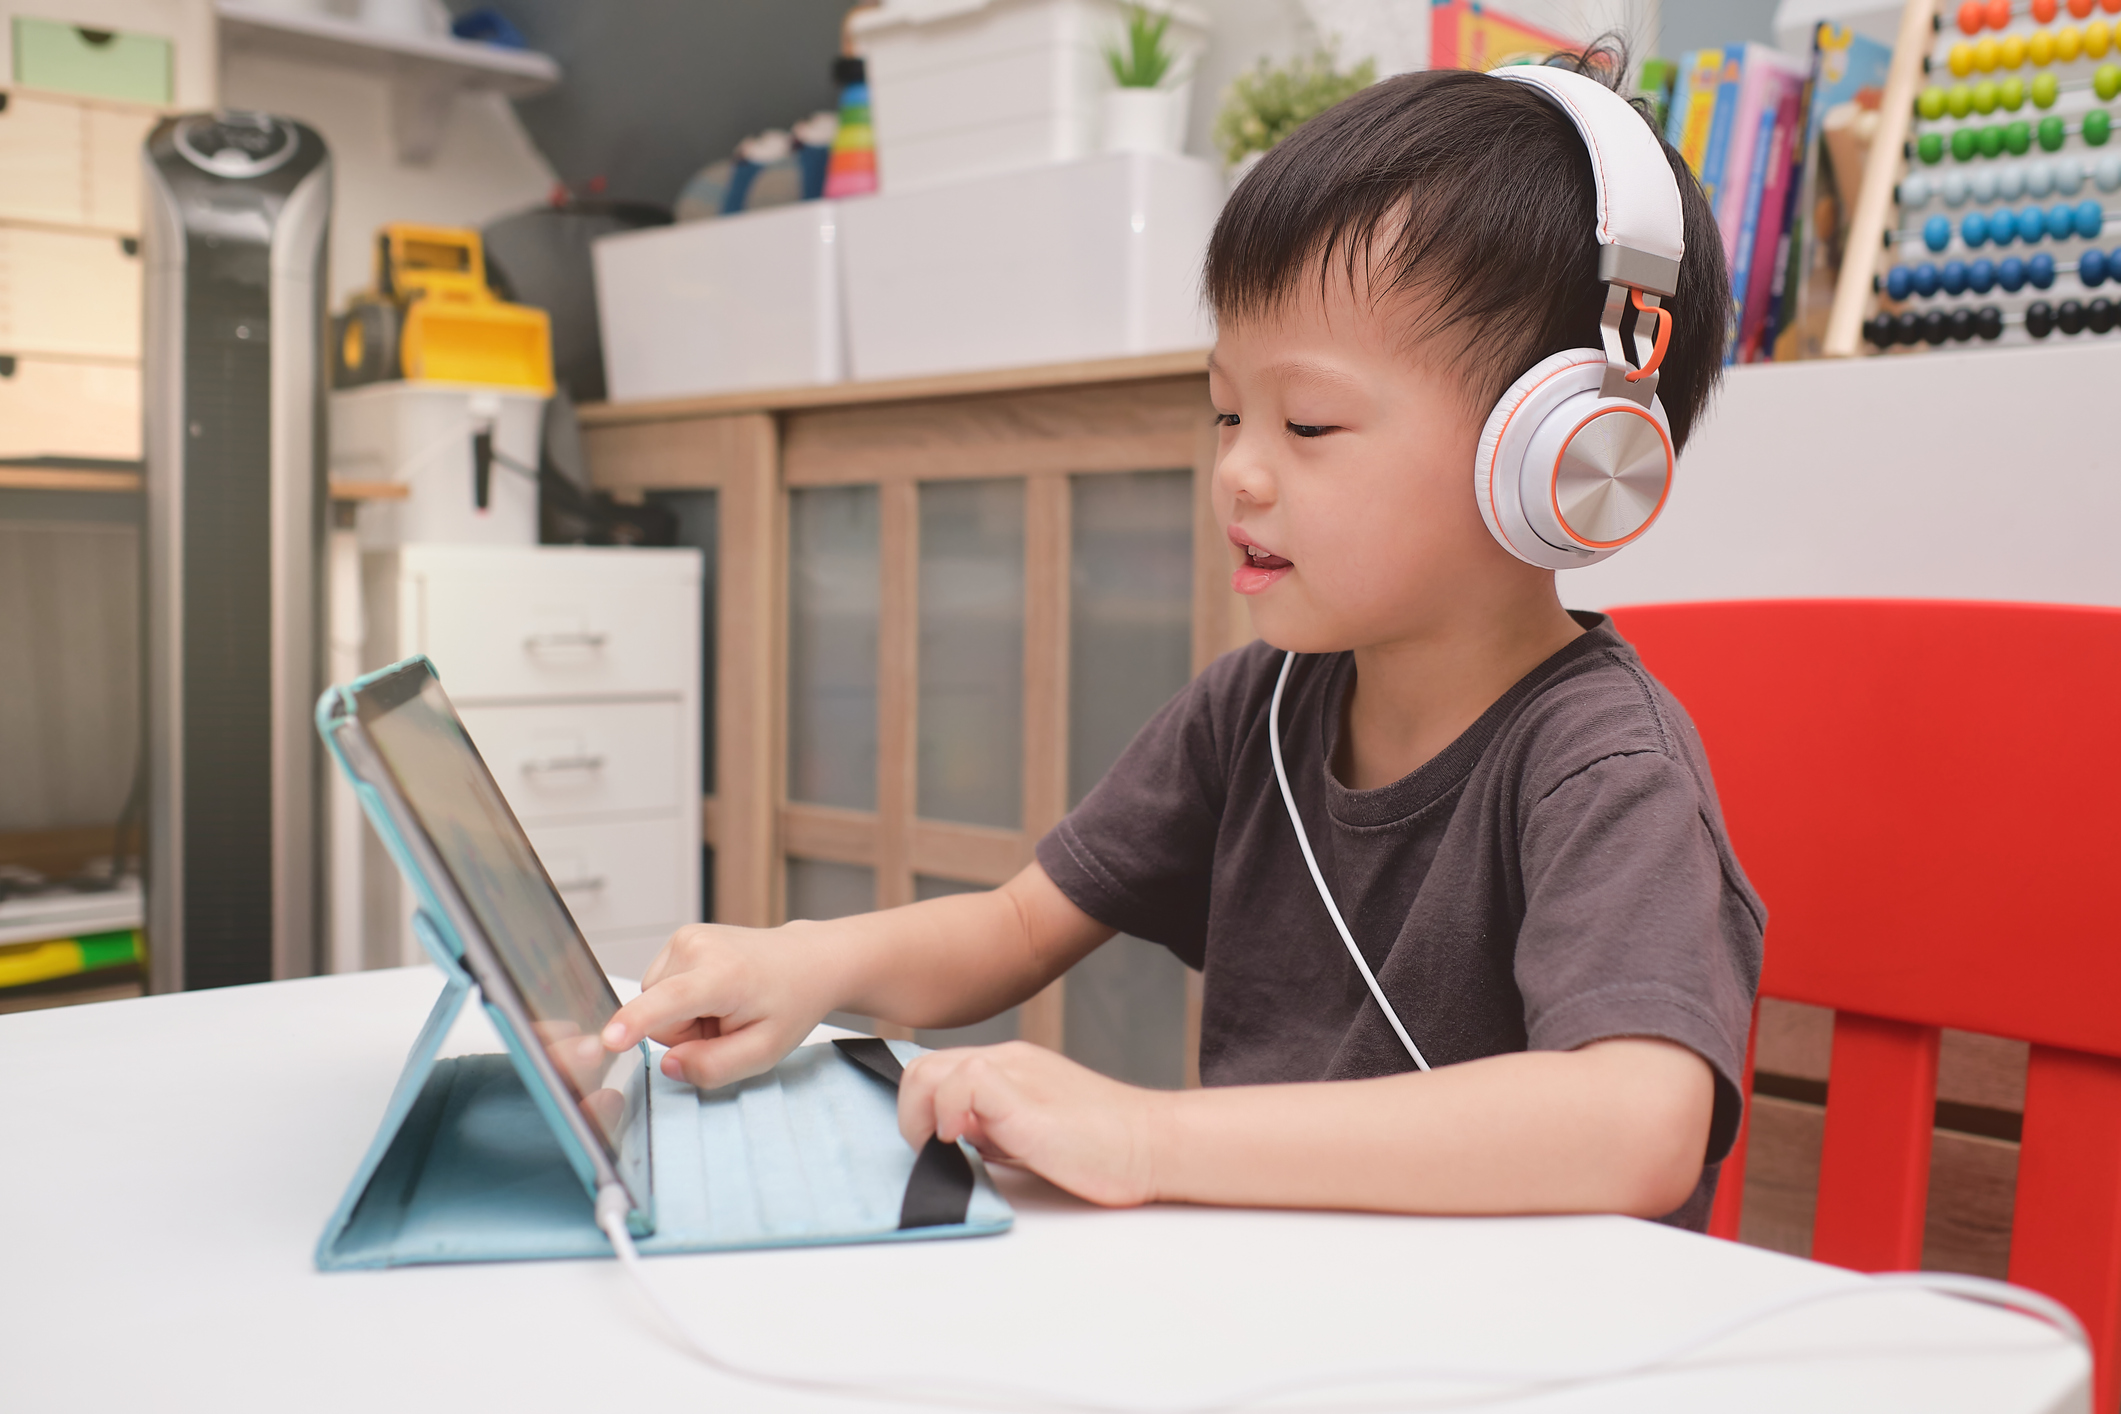 A toddler wearing headphones using an education app on a tablet